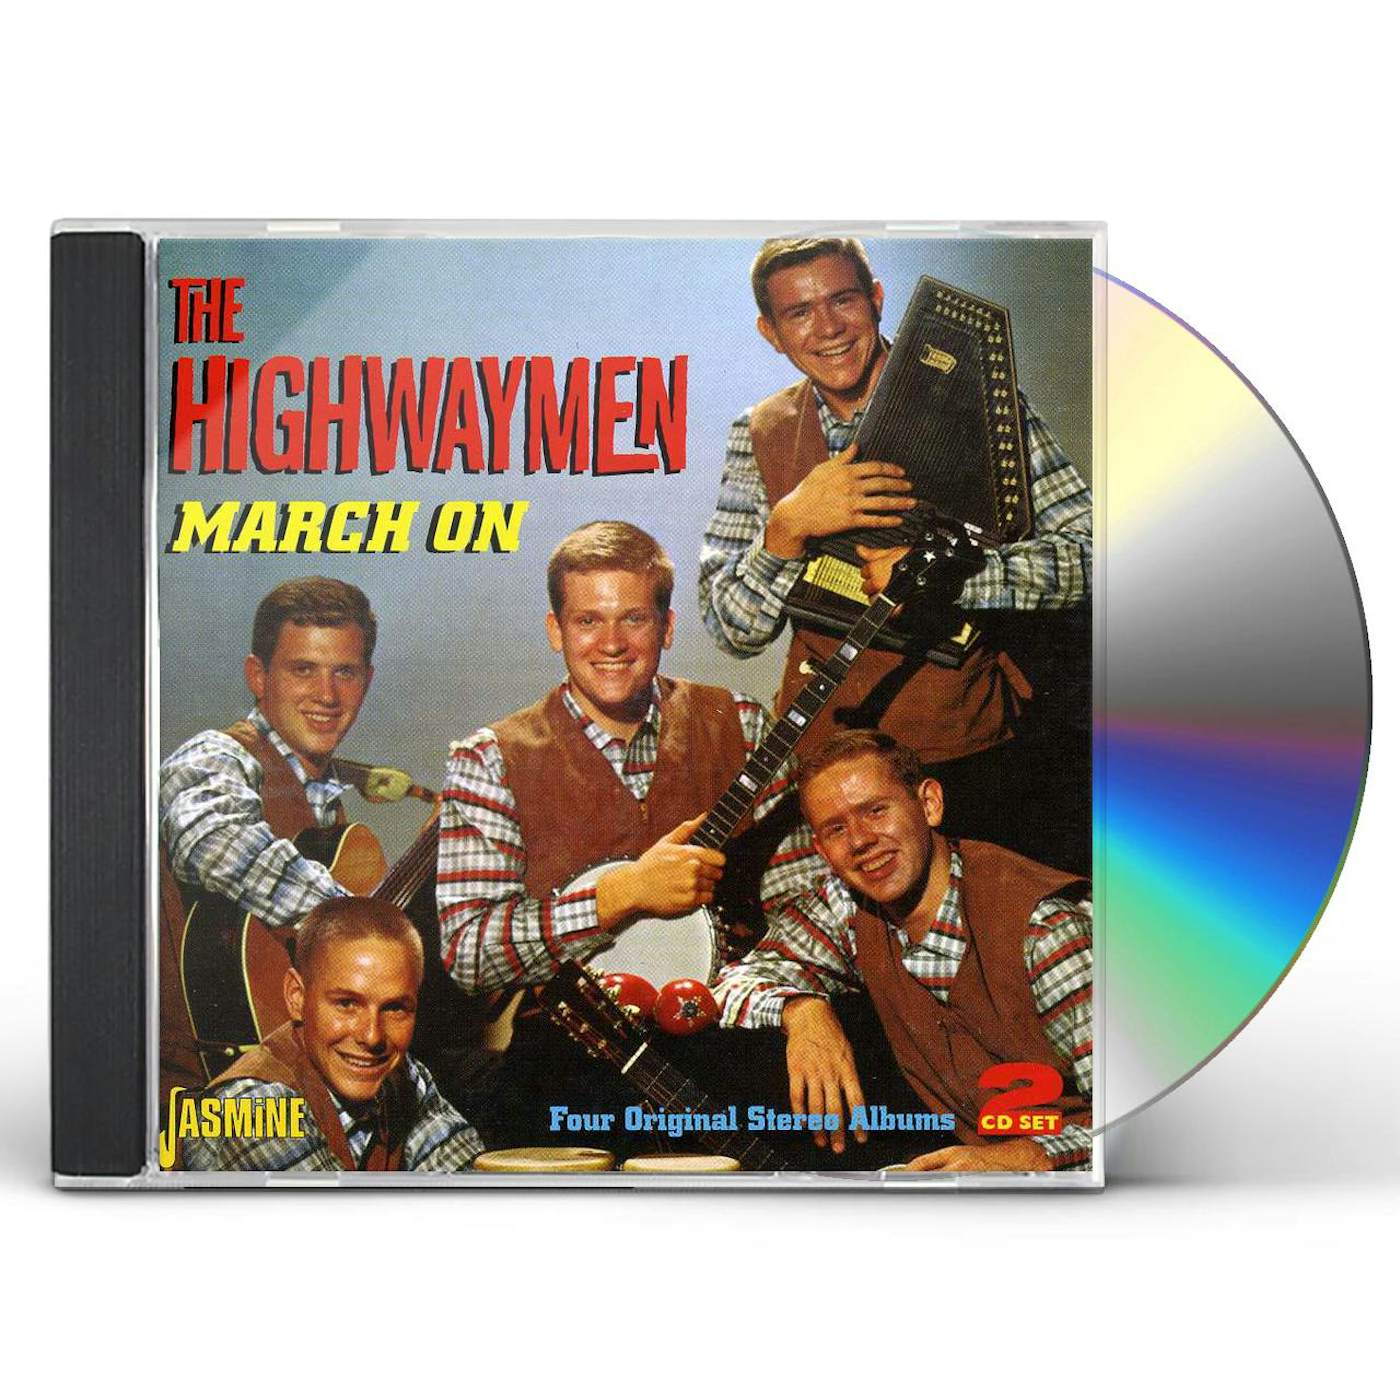 The Highwaymen MARCH ON CD